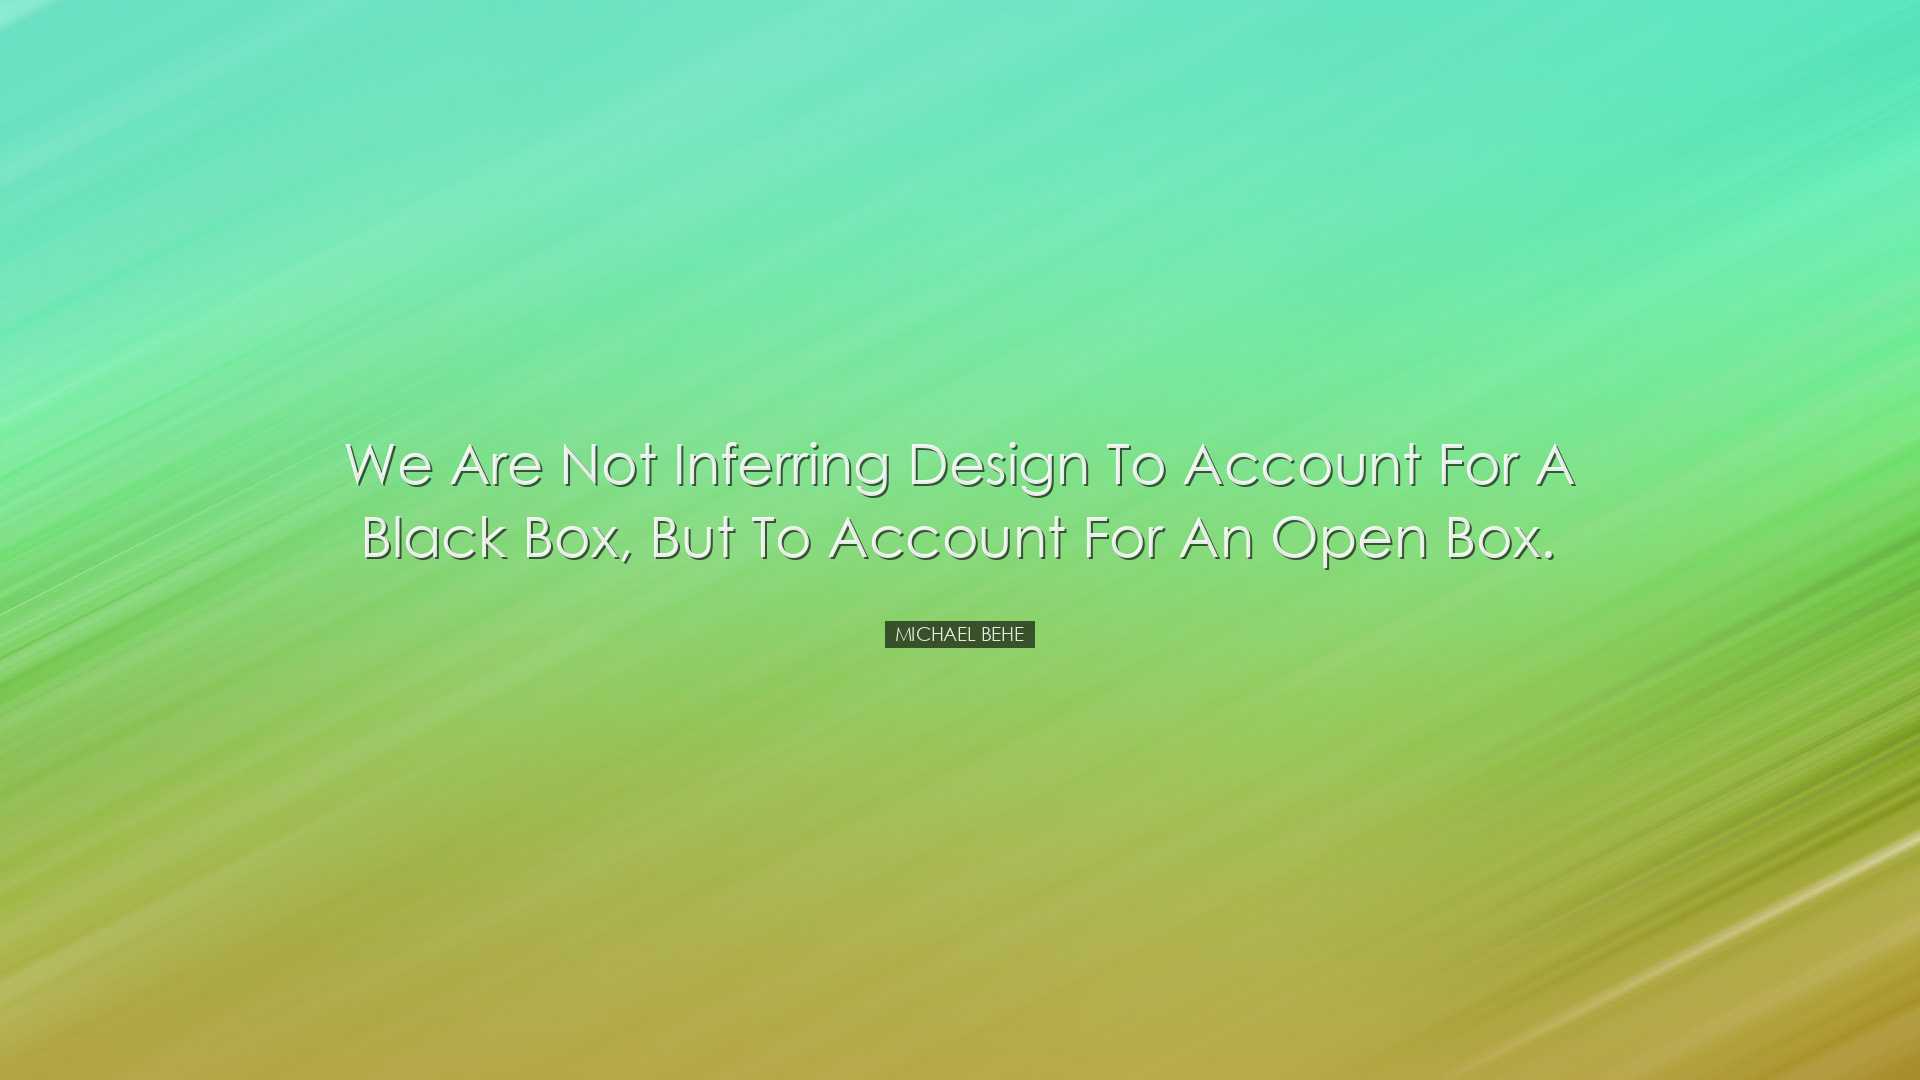 We are not inferring design to account for a black box, but to acc